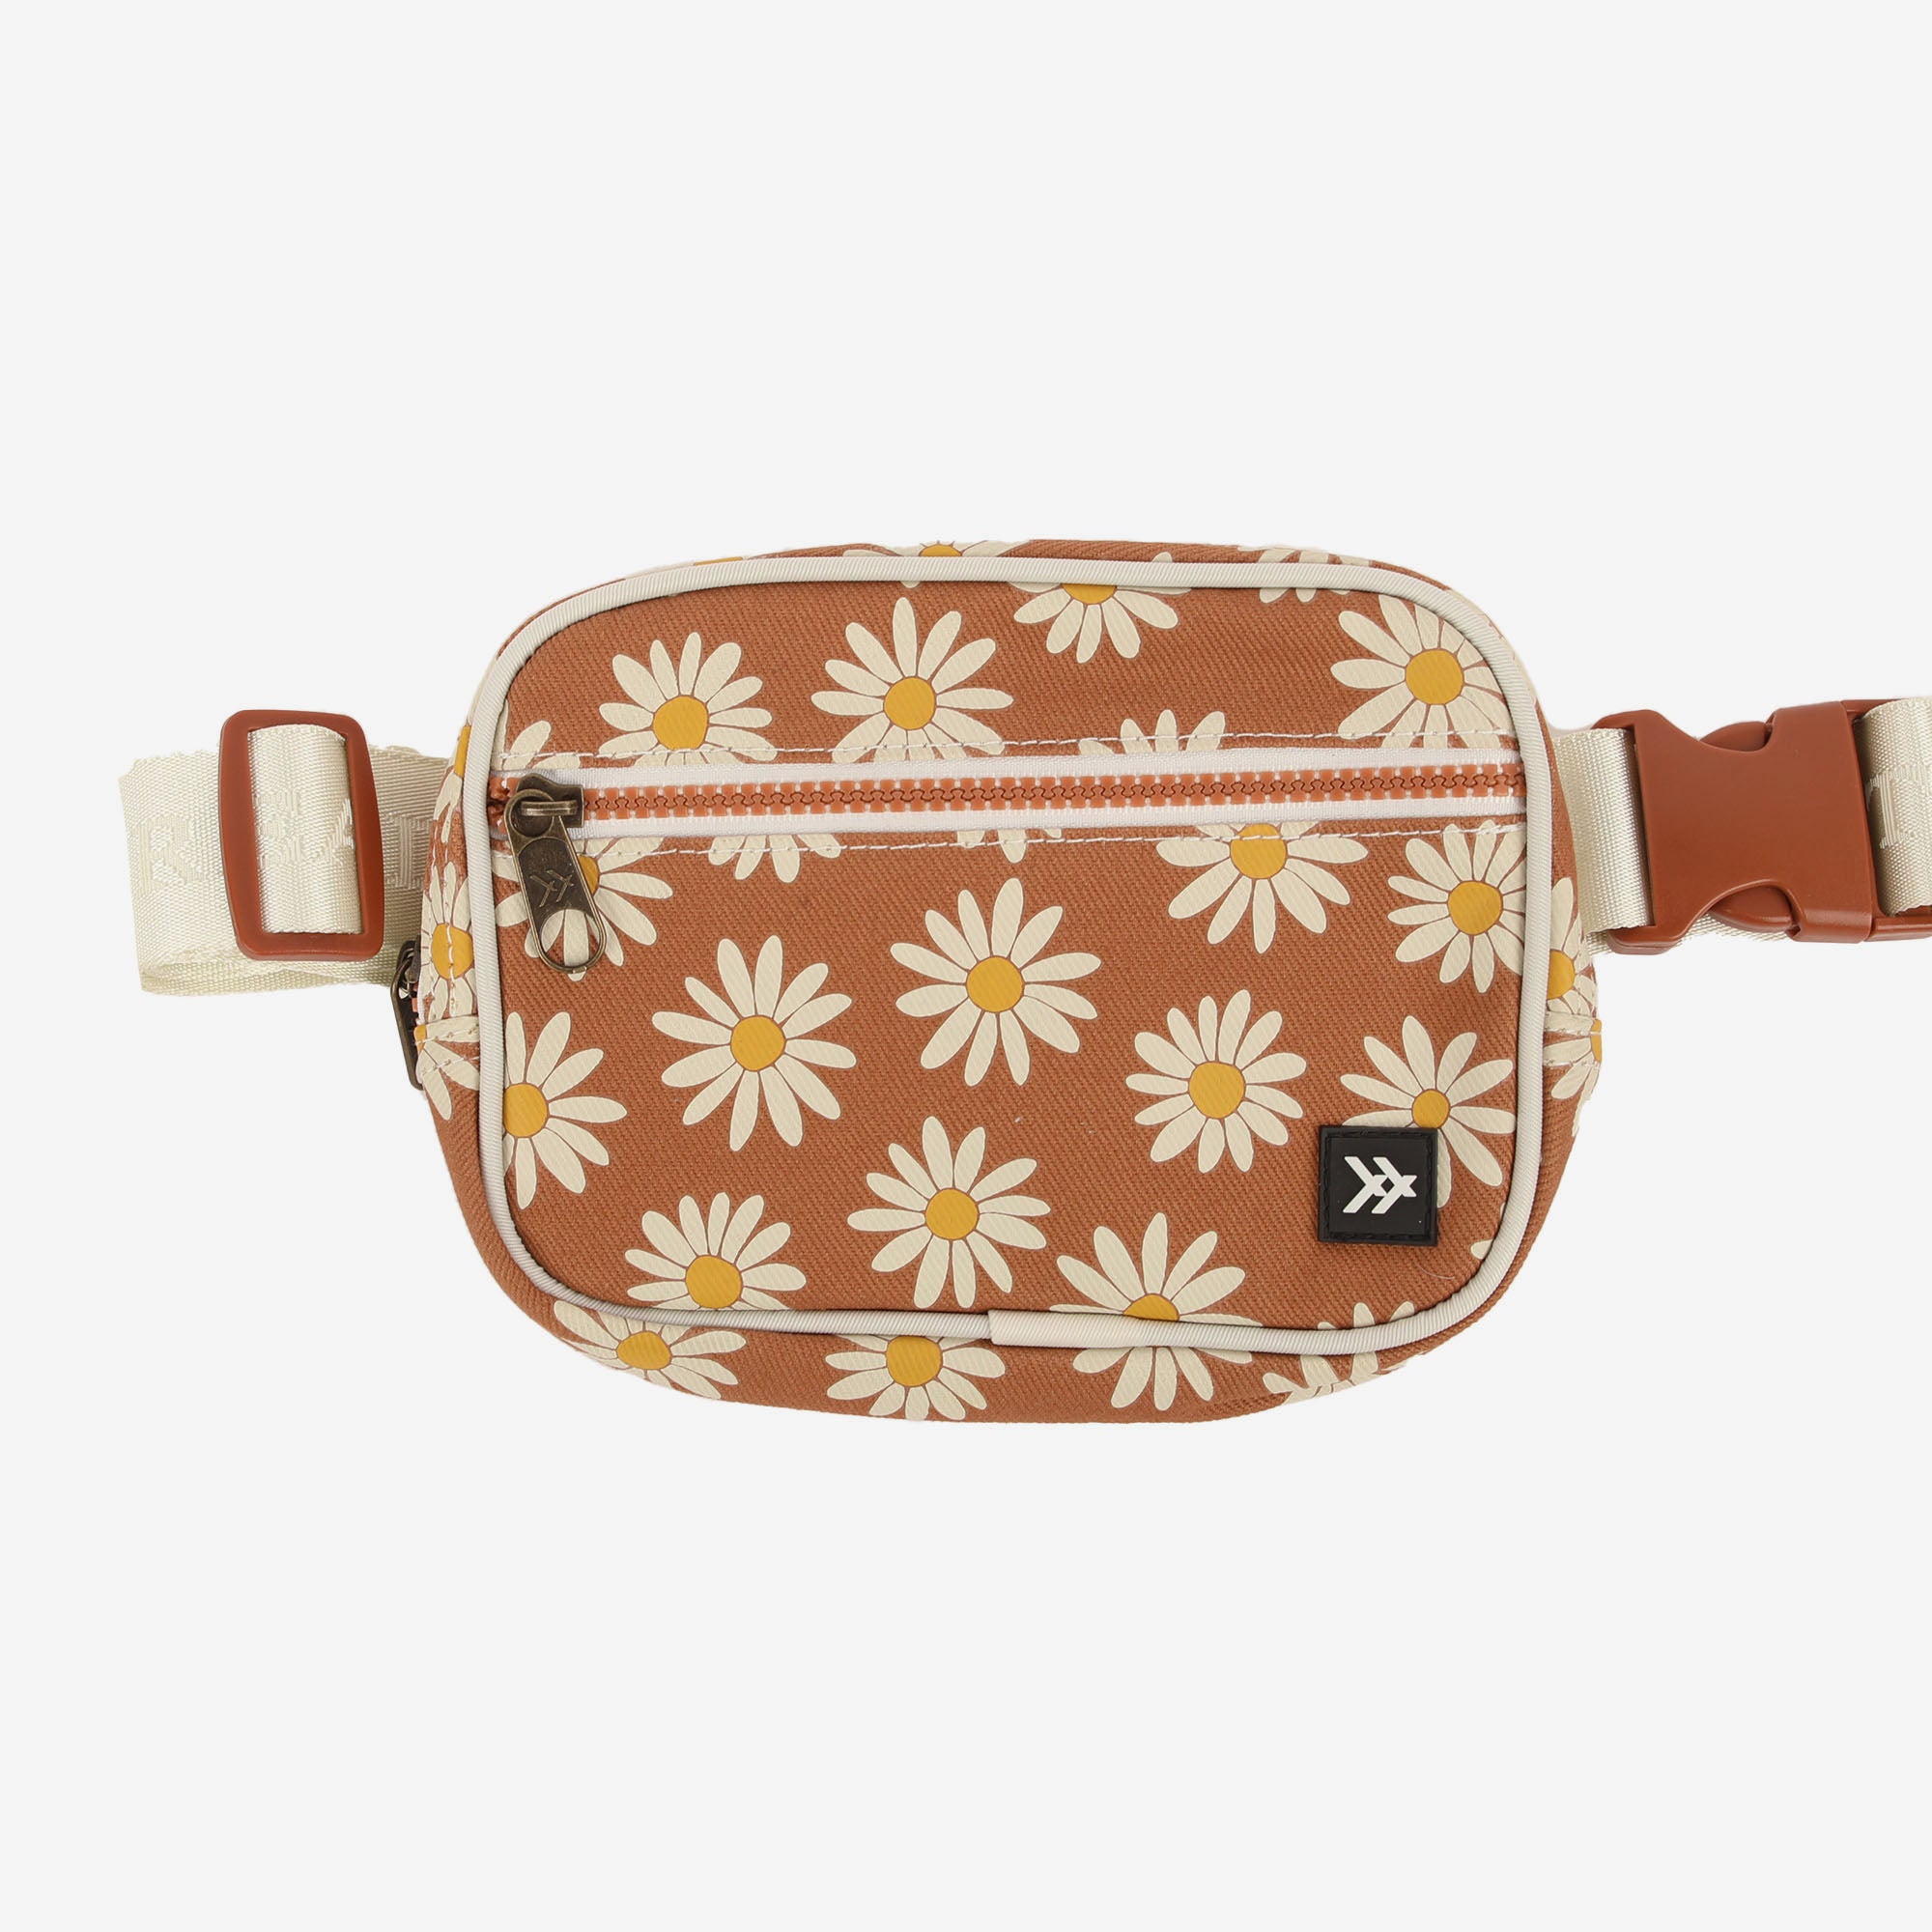 Brown and cream floral fanny pack